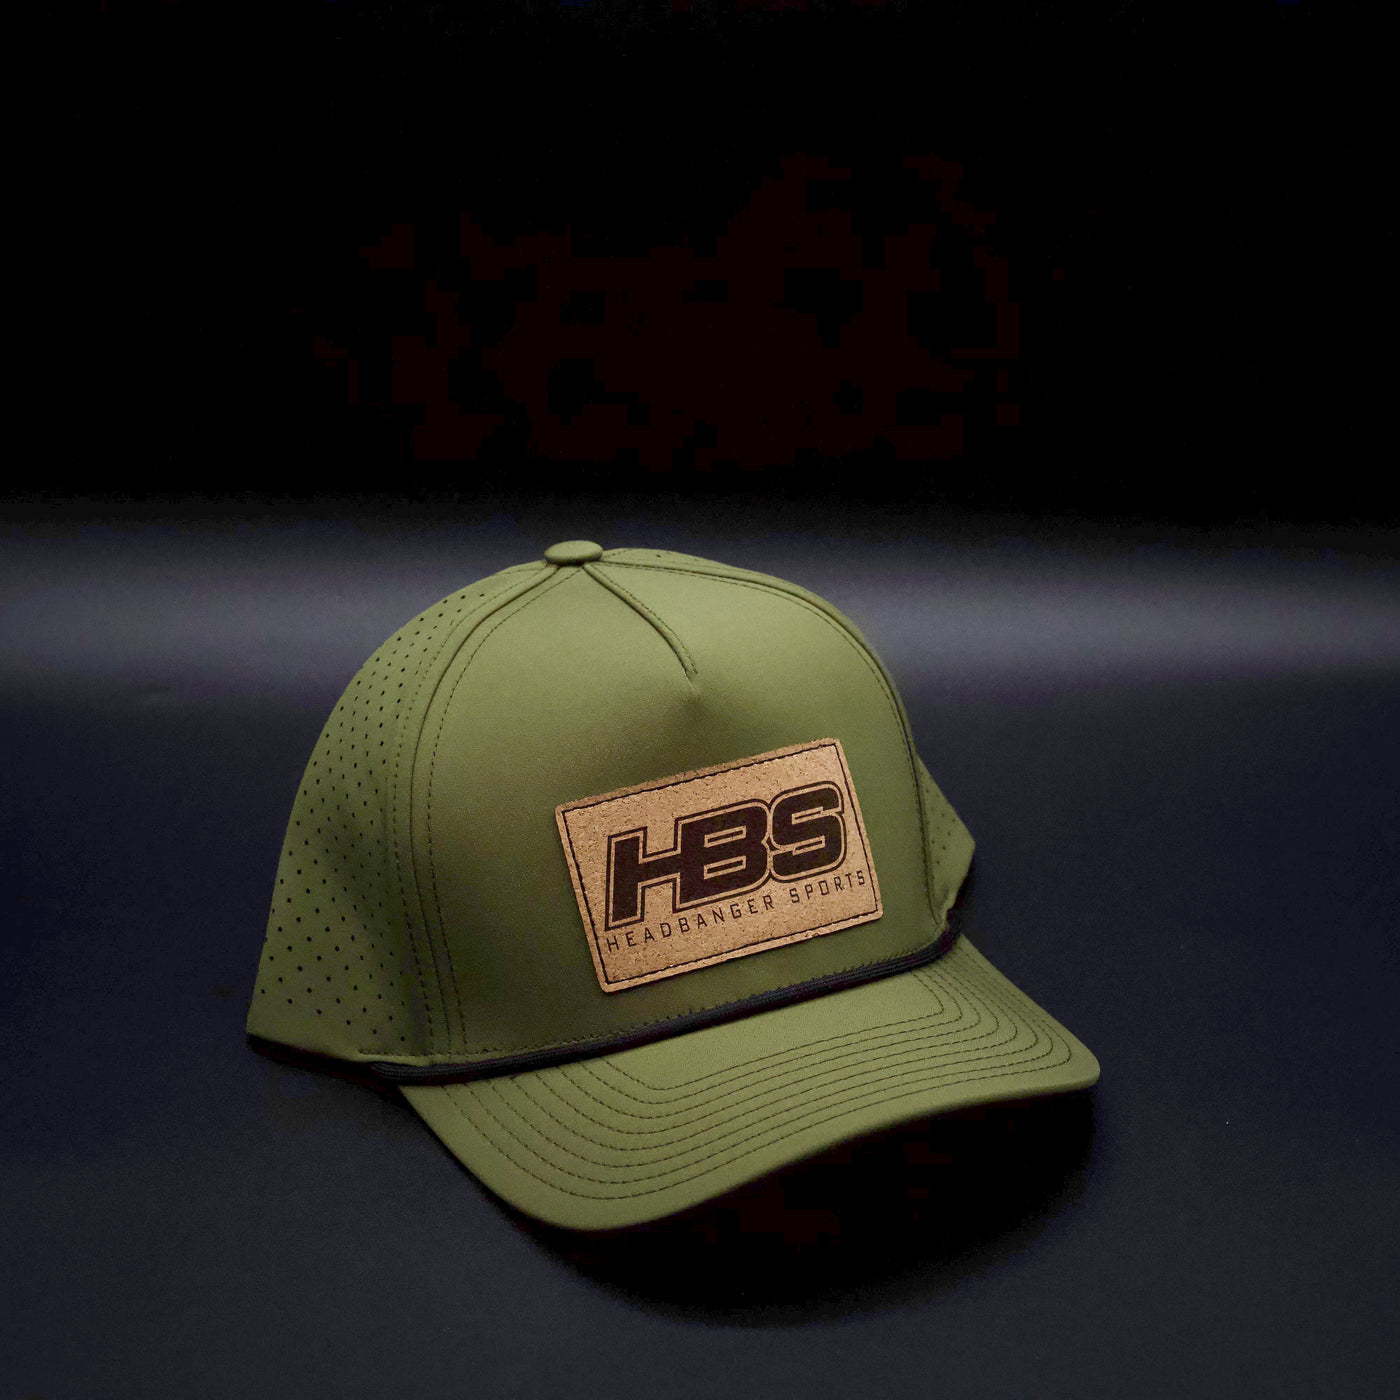 Headbanger Sports Exclusive Olive P424 Perforated Snapback Lifestyle Faux Leather Patch Hat: Cork HBS Patch